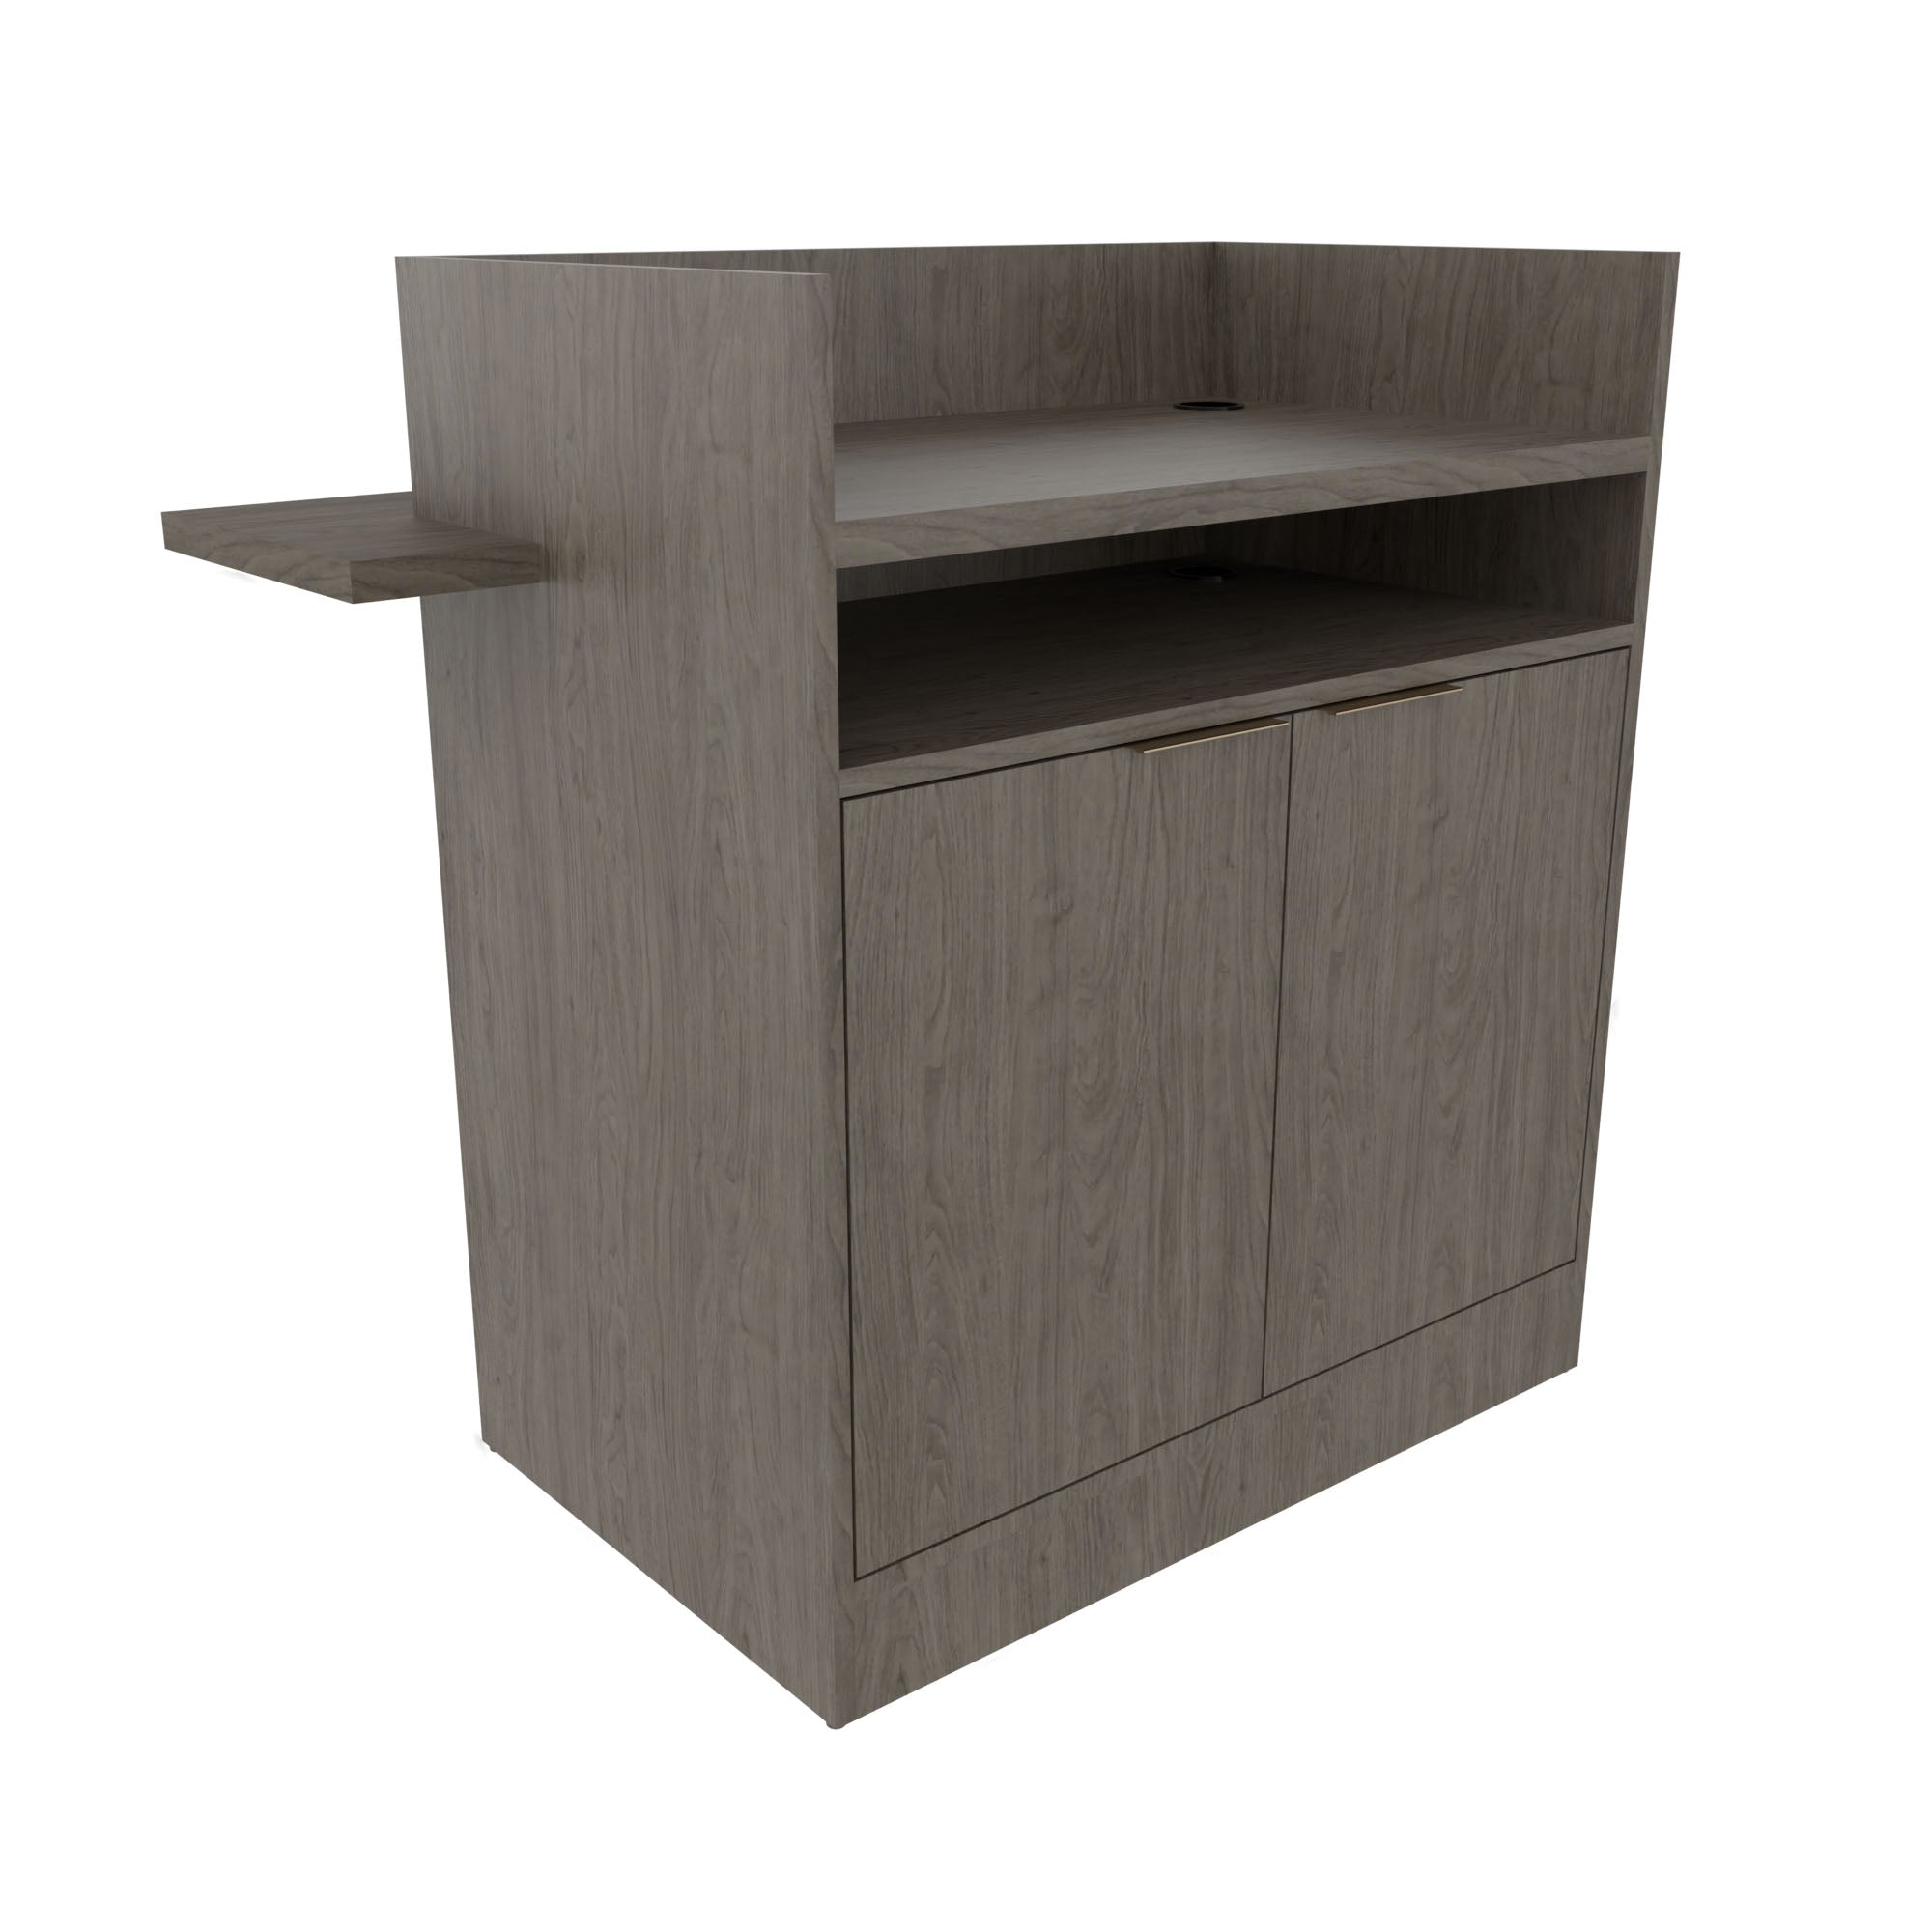 Finley Desk with Wrap-around Ledge - Collins - Salon Equipment and Barber Equipment